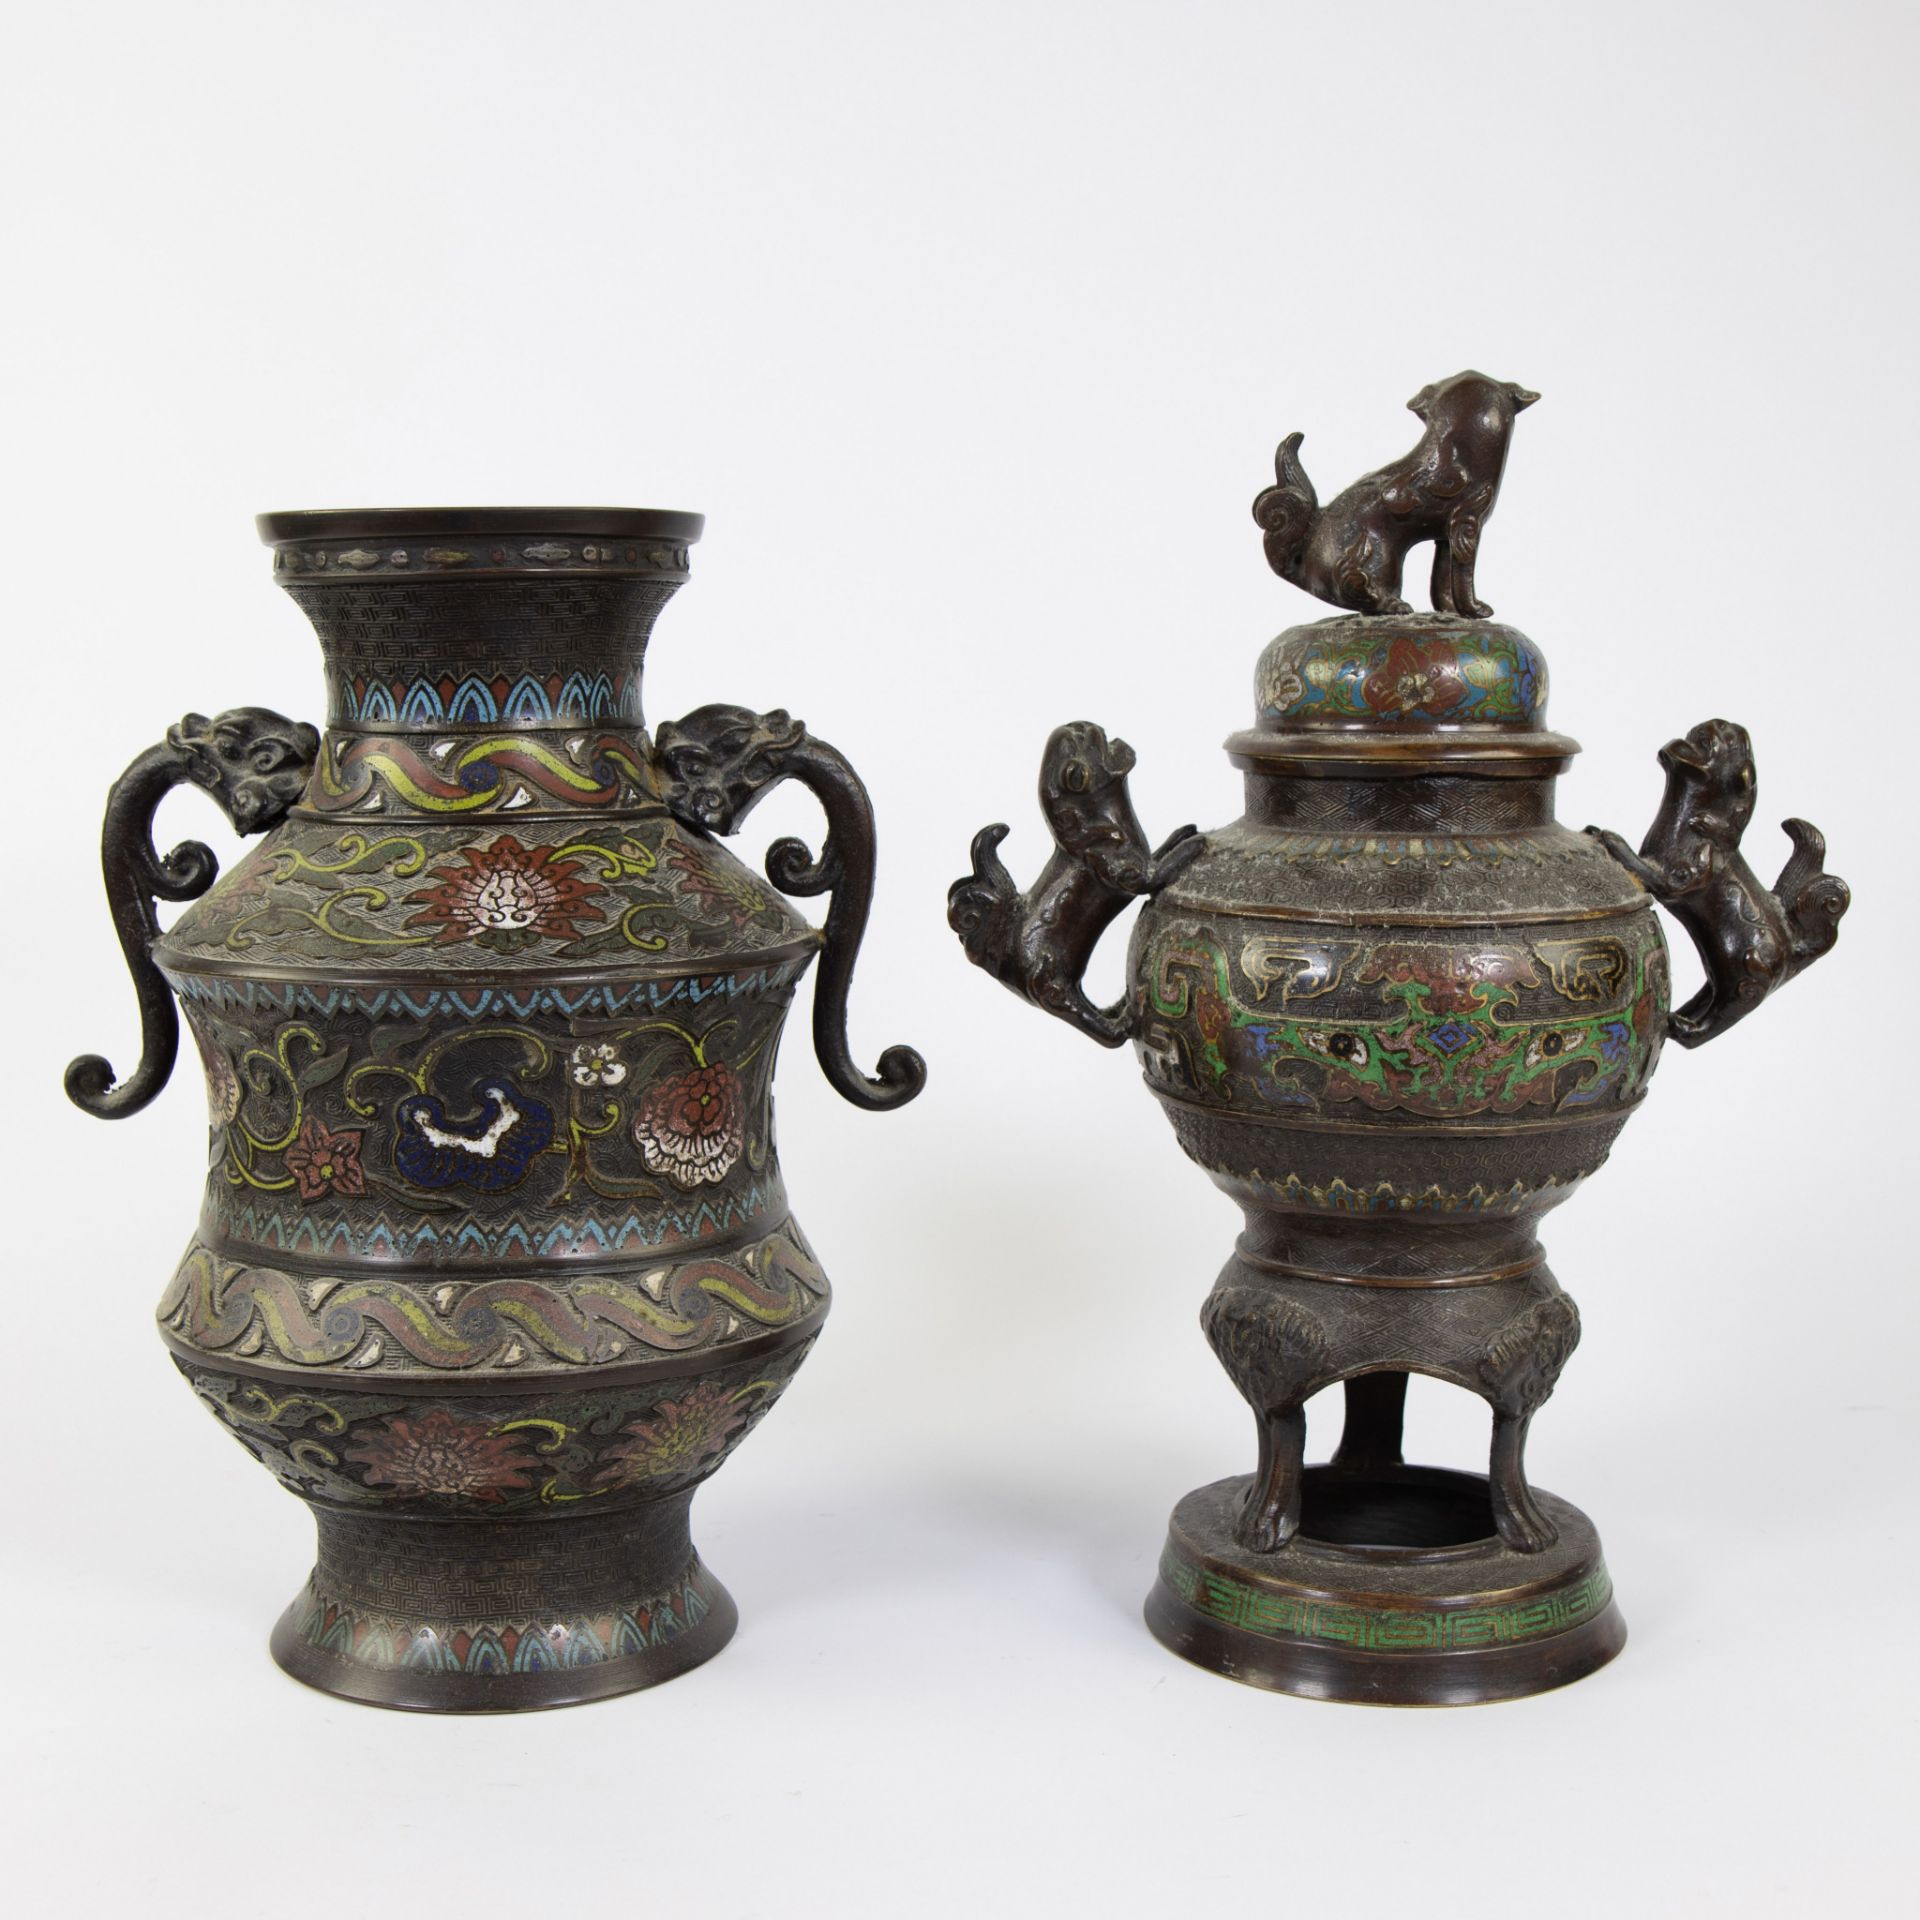 Japanese champlevé vase and incense burner, 19th century - Image 3 of 5